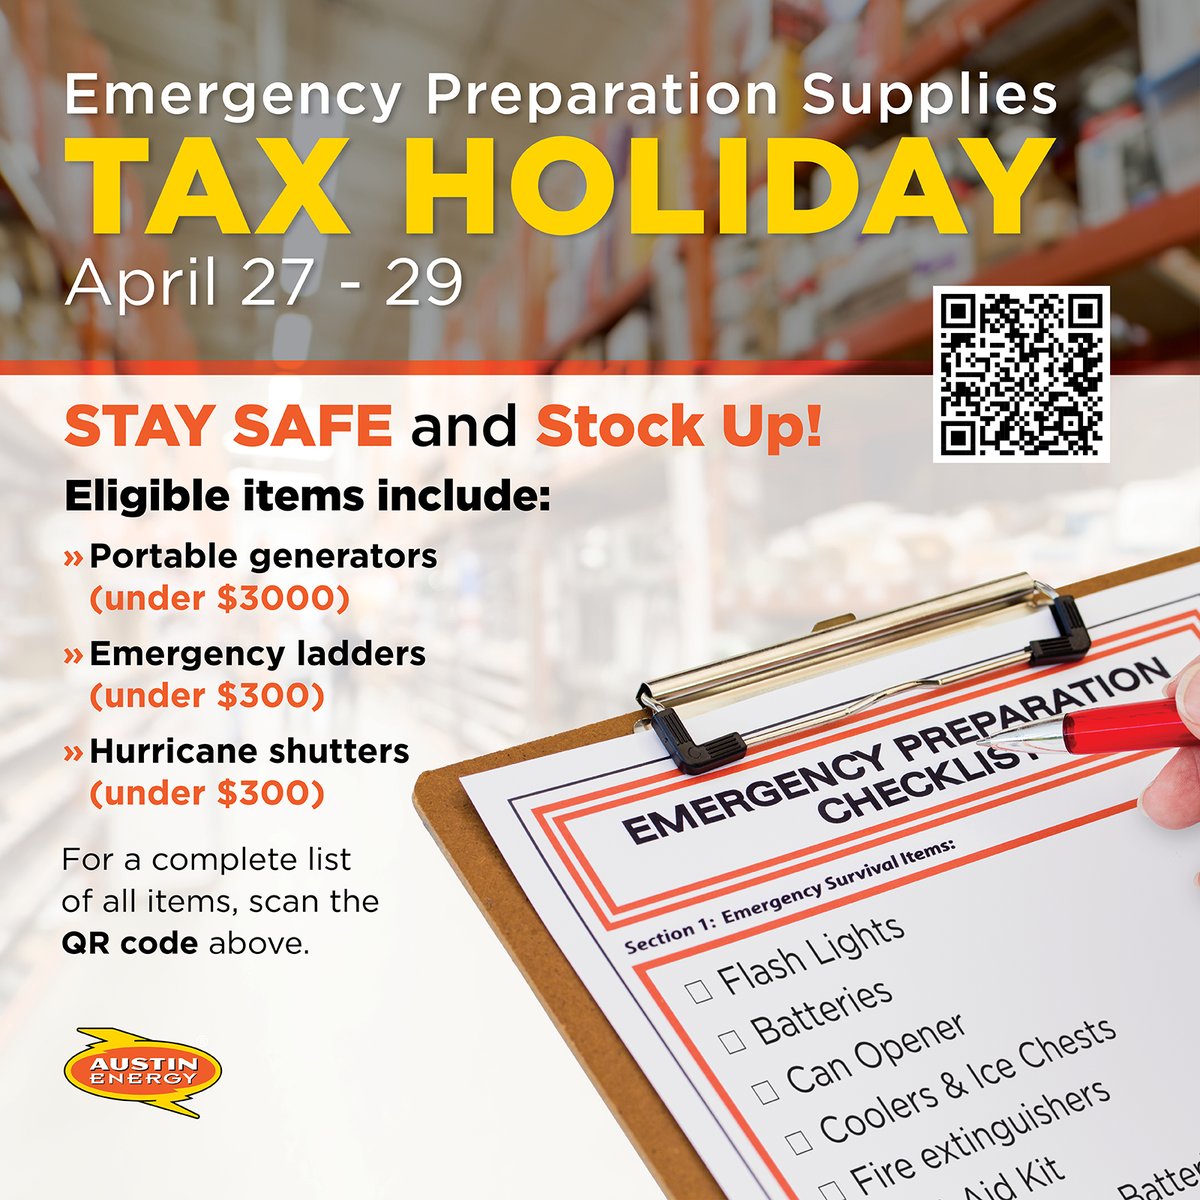 The statewide 2024 Emergency Preparation Supplies Sales Tax Holiday is this weekend. You can buy portable generators, emergency ladders, batteries, first aid kits & other emergency items tax free. For a complete list of eligible items & information: comptroller.texas.gov/taxes/publicat…